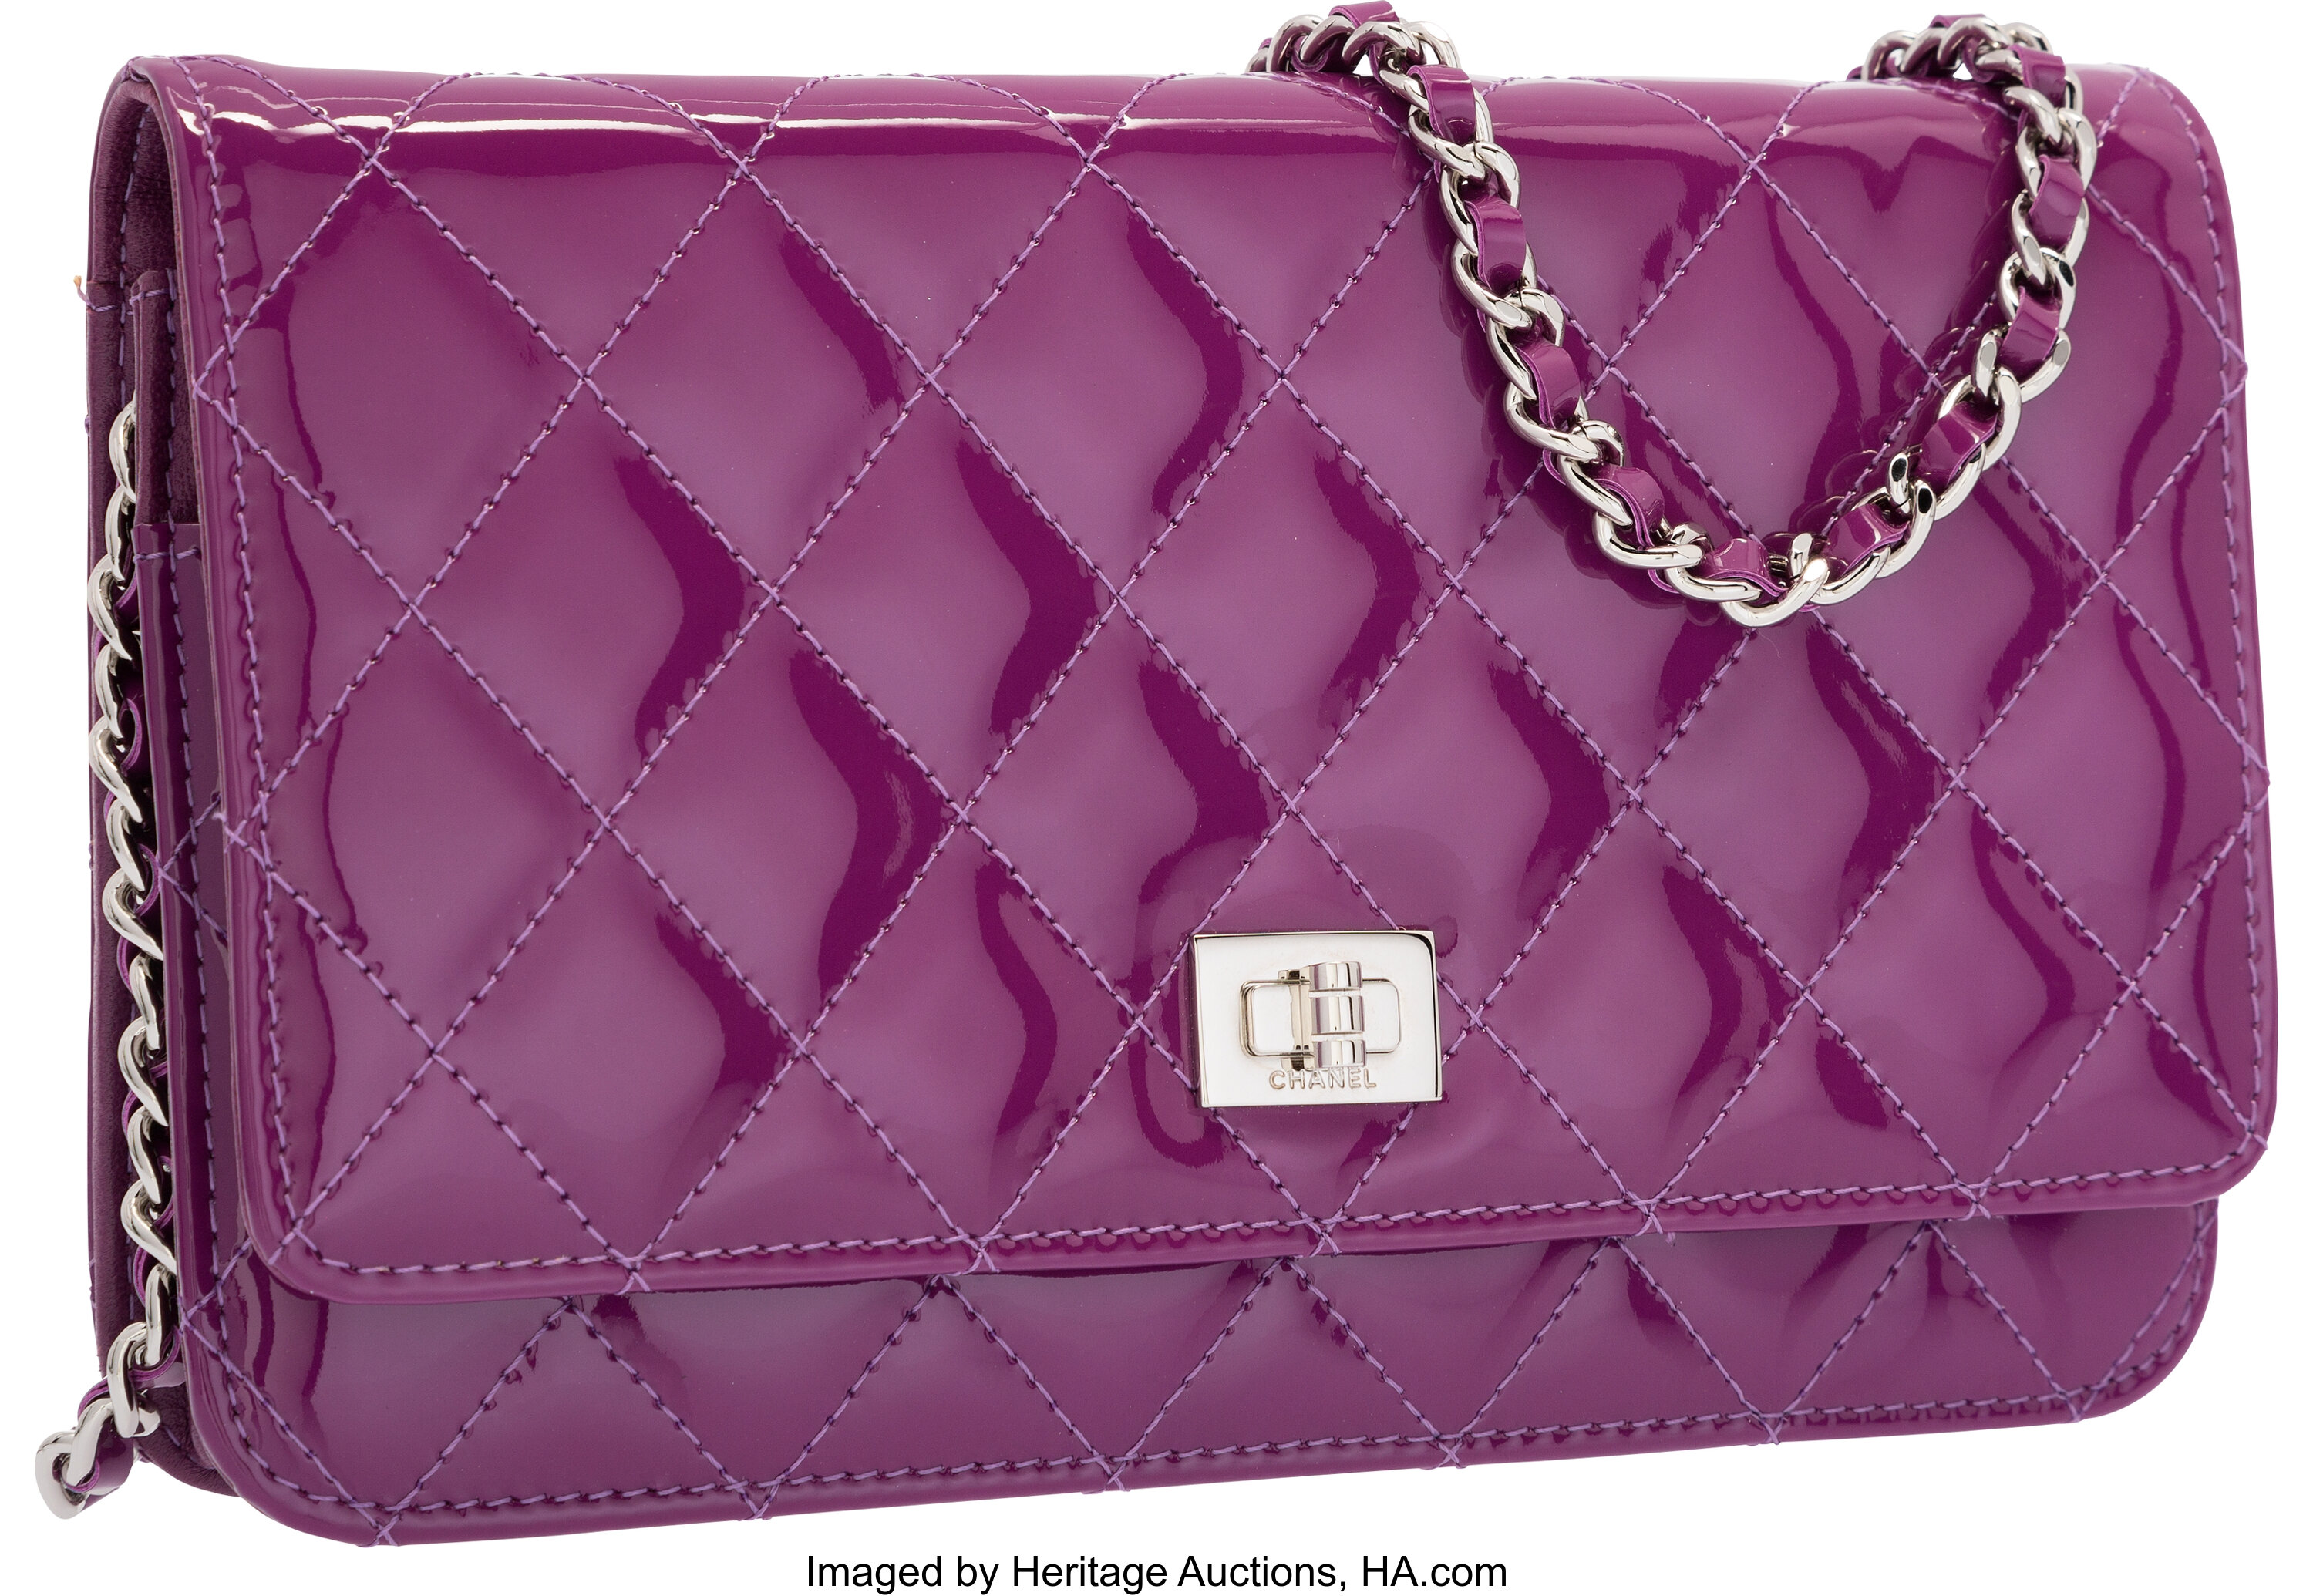 Chanel Purple Quilted Patent Leather Reissue Wallet on Chain Bag